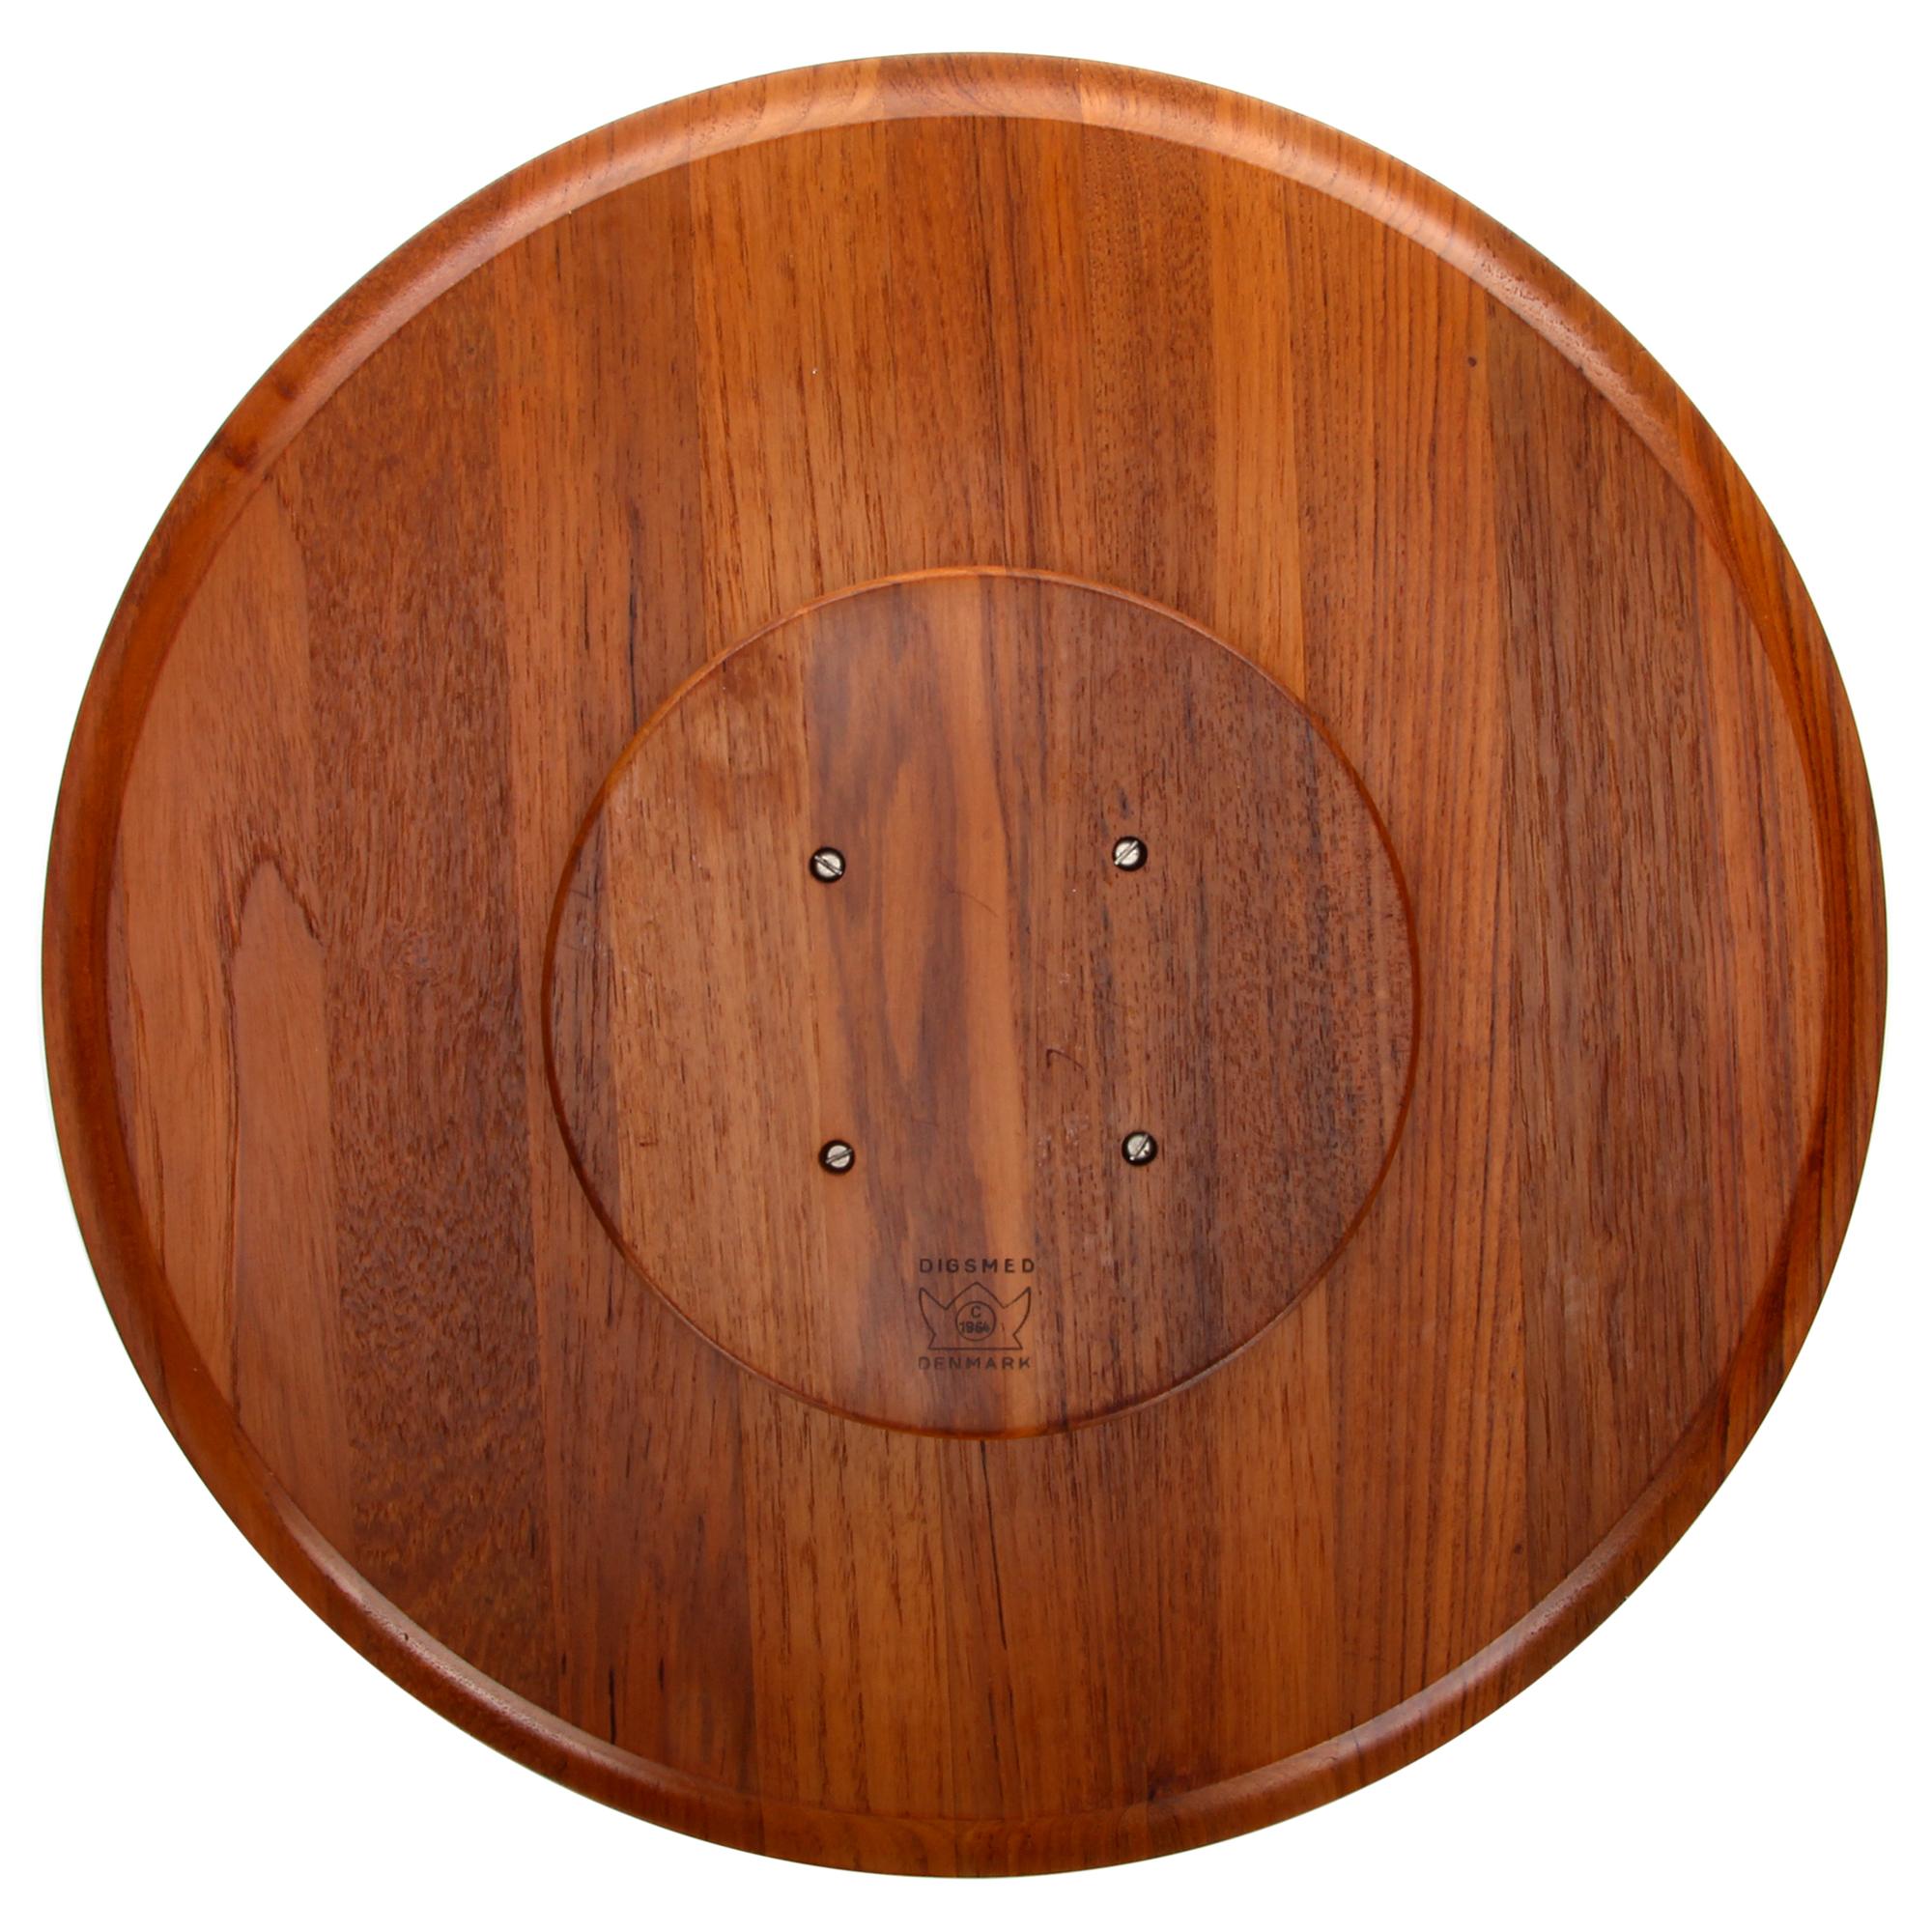 Mid-Century Modern Lazy Susan Danish Modern Teak Serving Tray or Platter by Digsmed in 1964